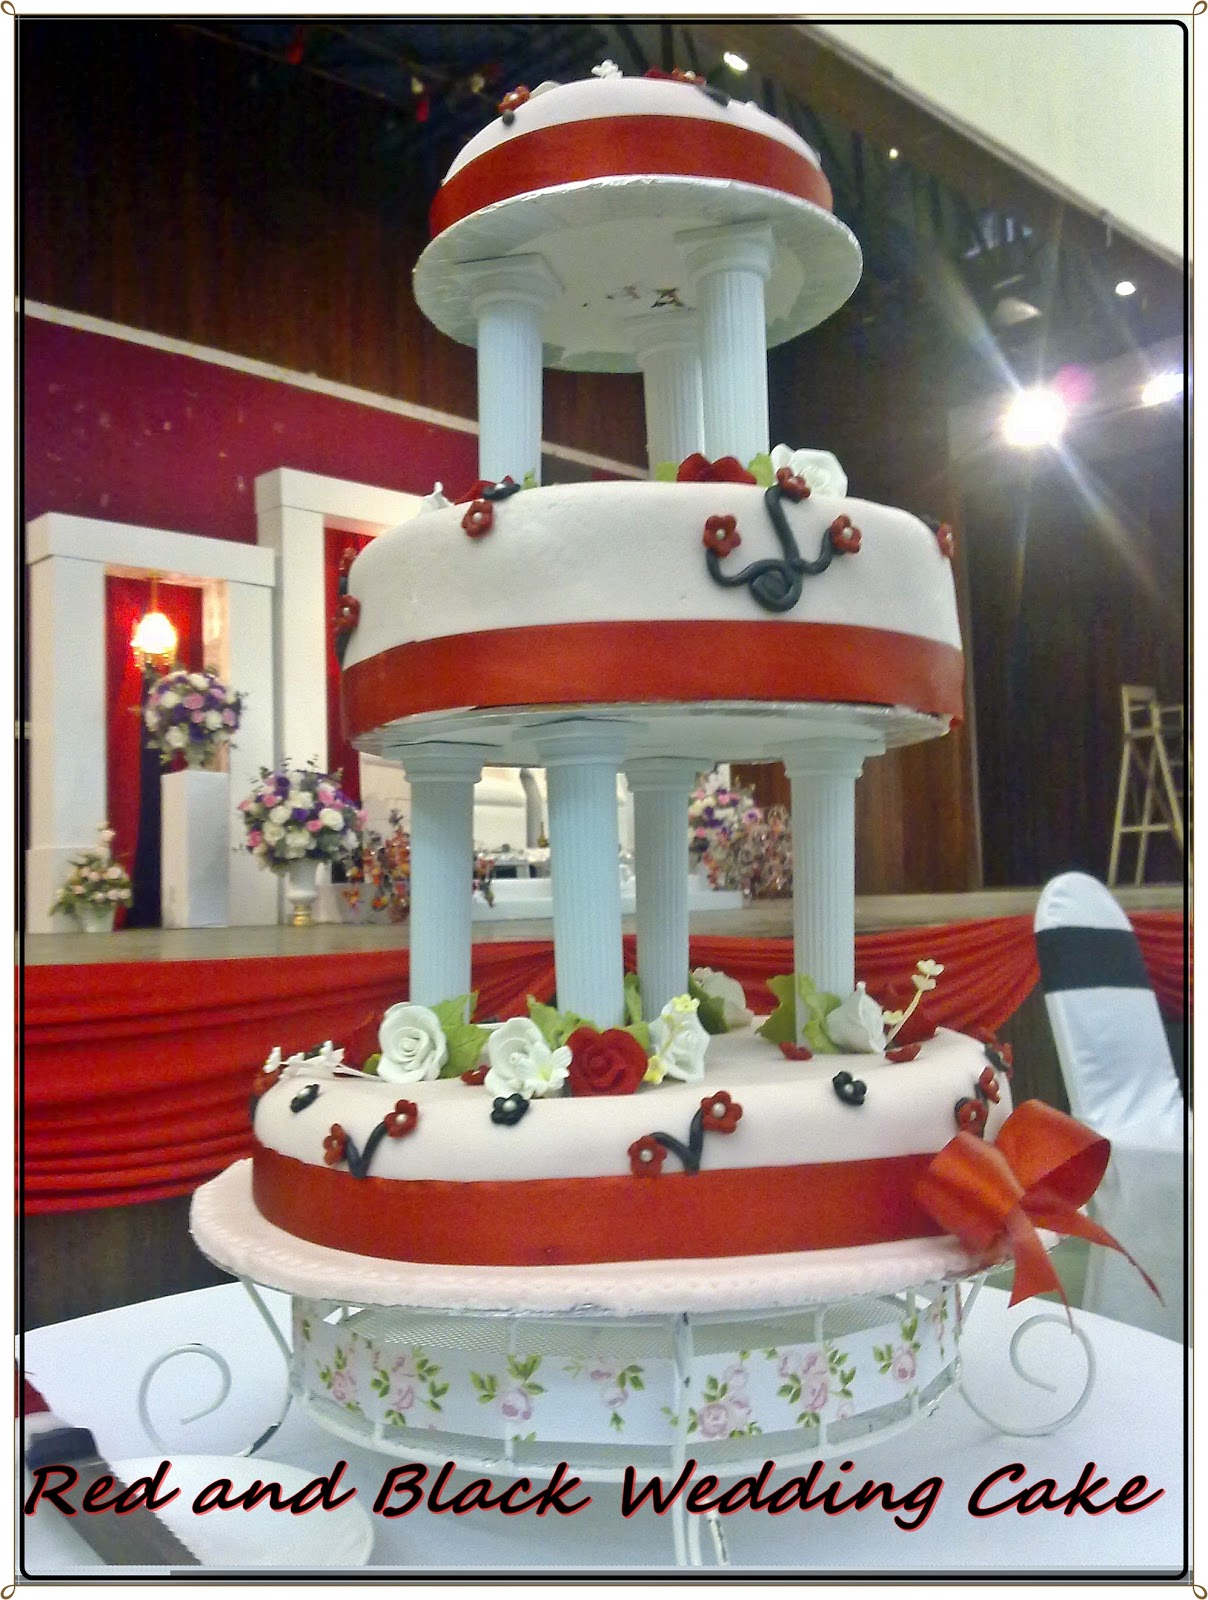 New Wedding Cakes Project.. Black and Red wedding Cake.